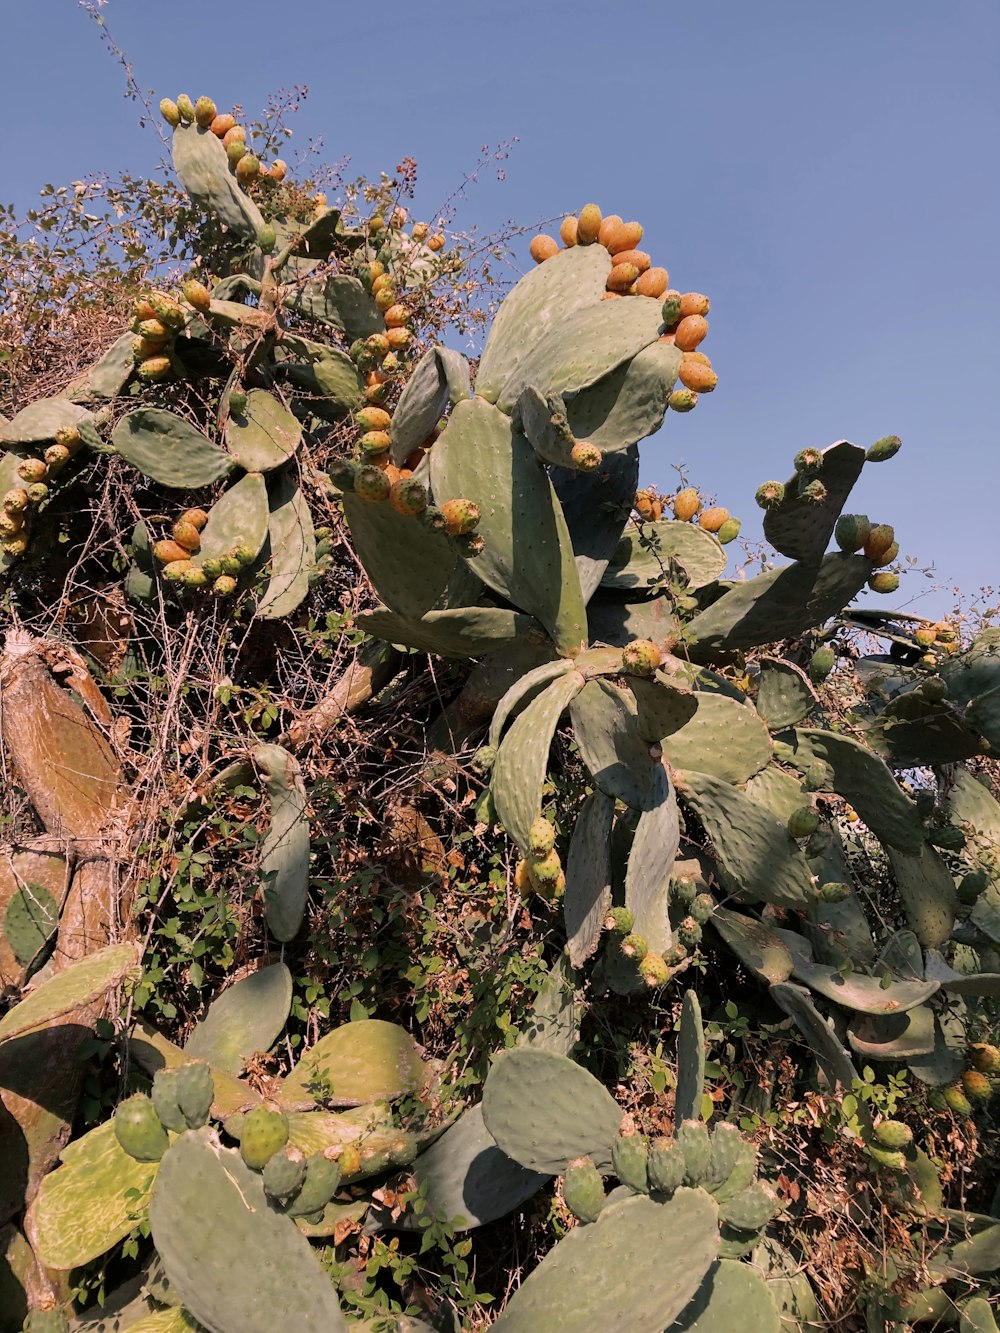 a large cactus with lots of fruit growing on it